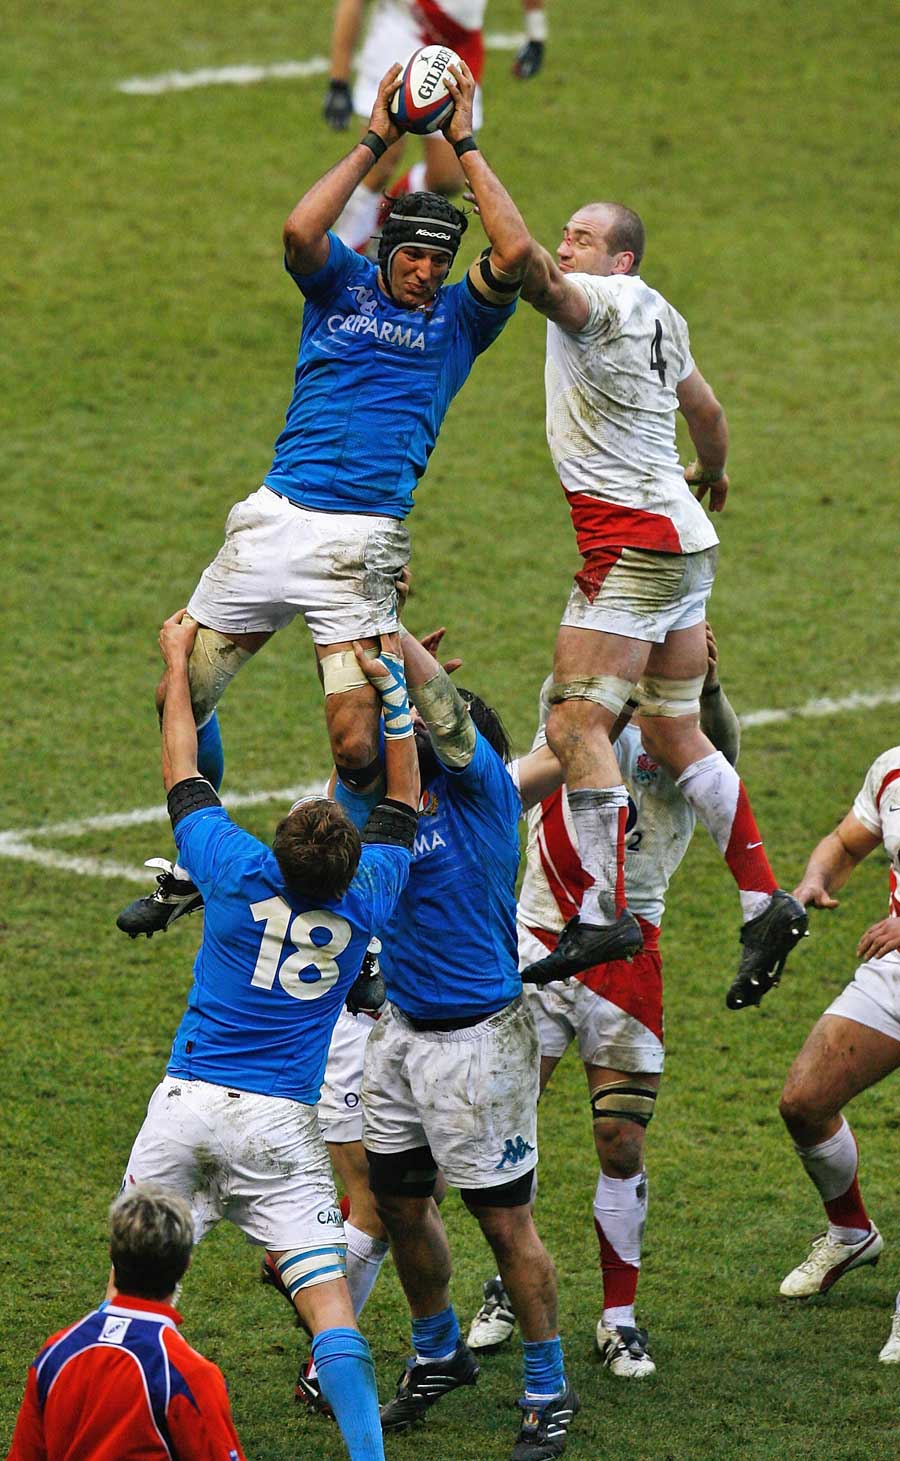 Italy's Santiago Dellape claims a lineout